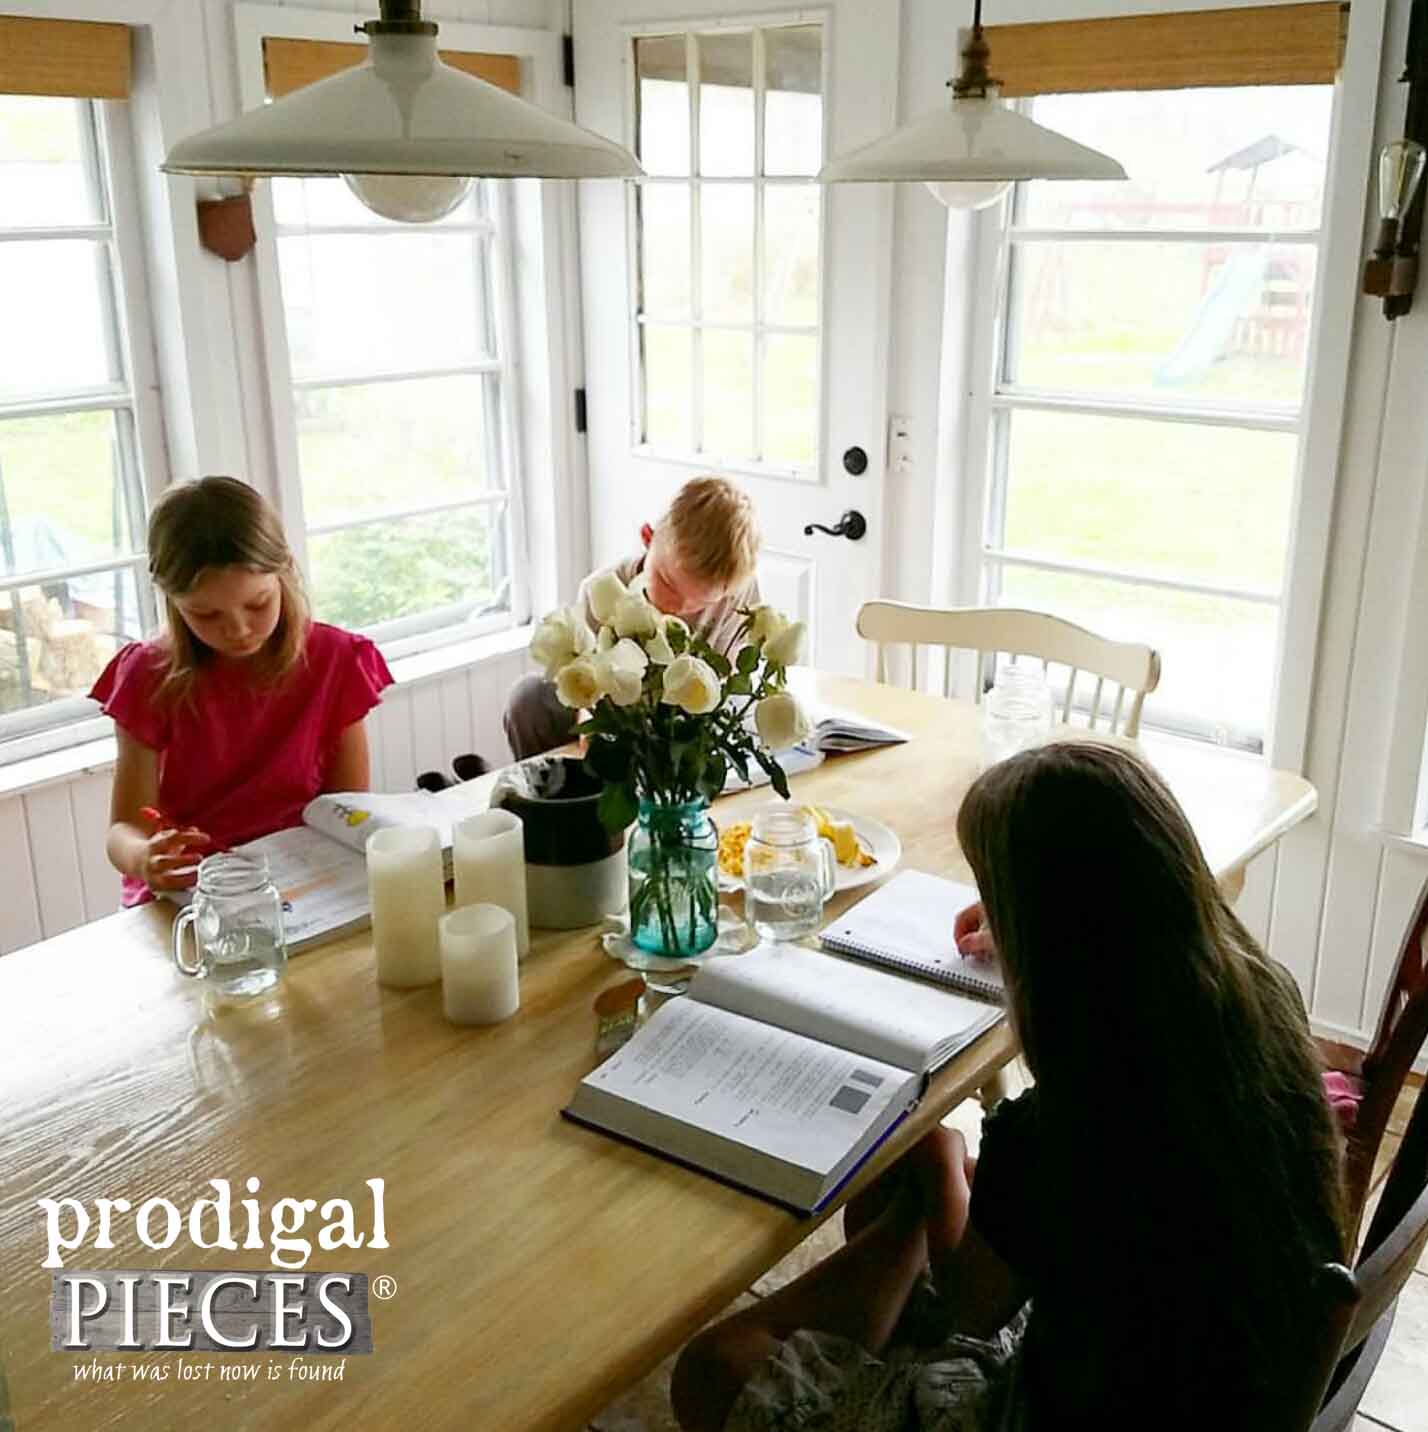 Children Working on Homeschool Work | Budgeting Business while Homeschooling | Amazing Grace | Prodigal Pieces | prodigalpieces.com